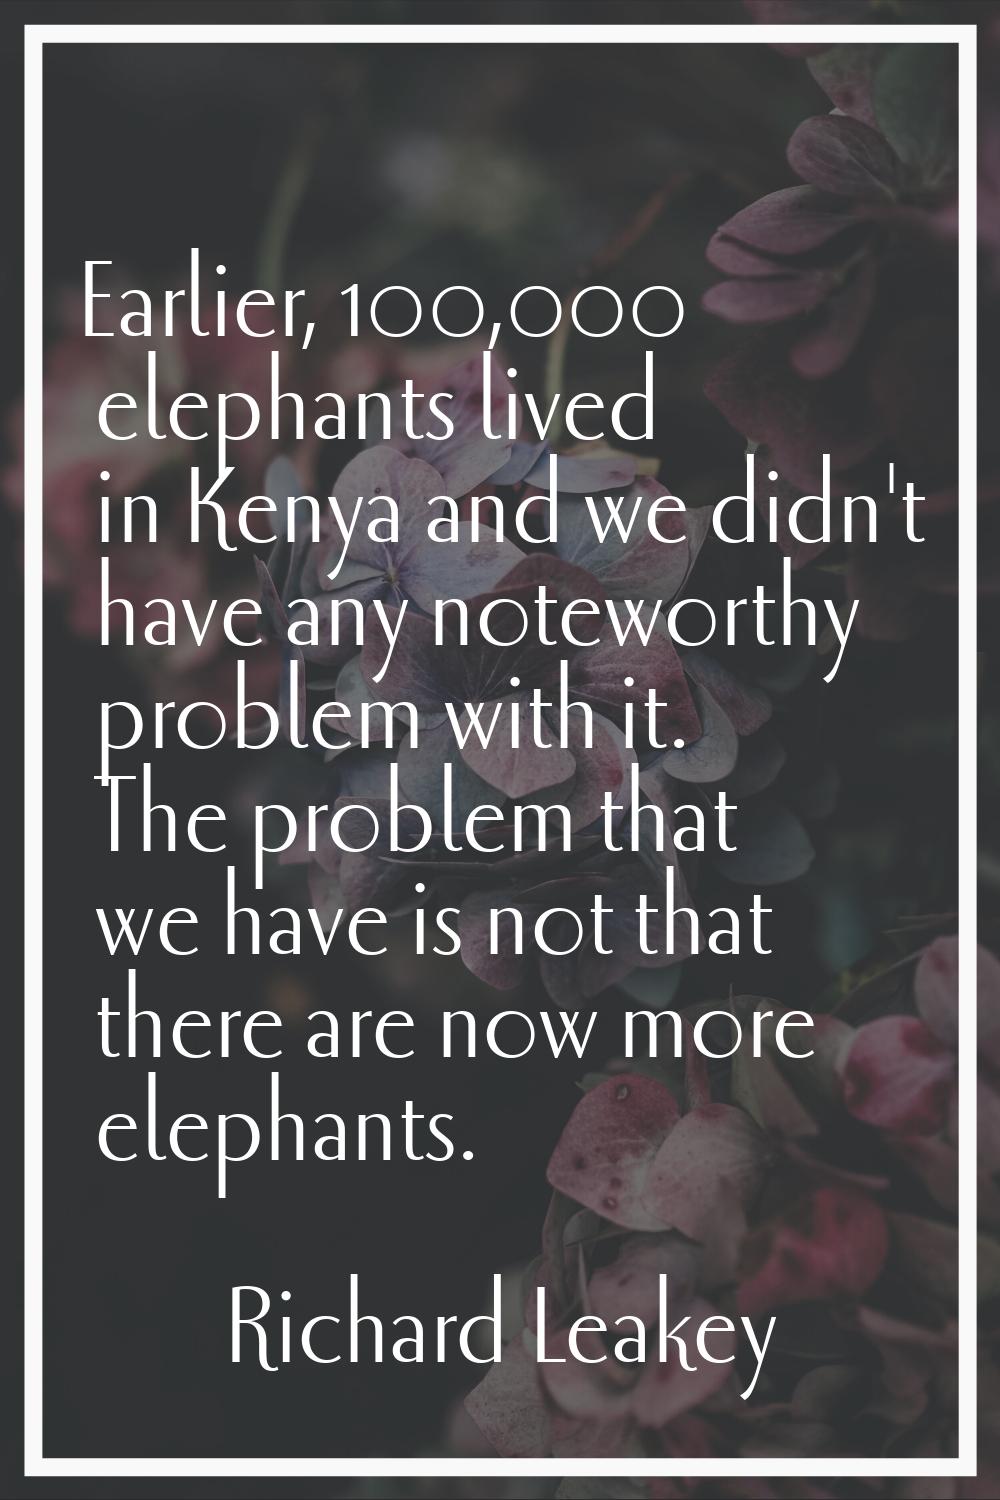 Earlier, 100,000 elephants lived in Kenya and we didn't have any noteworthy problem with it. The pr